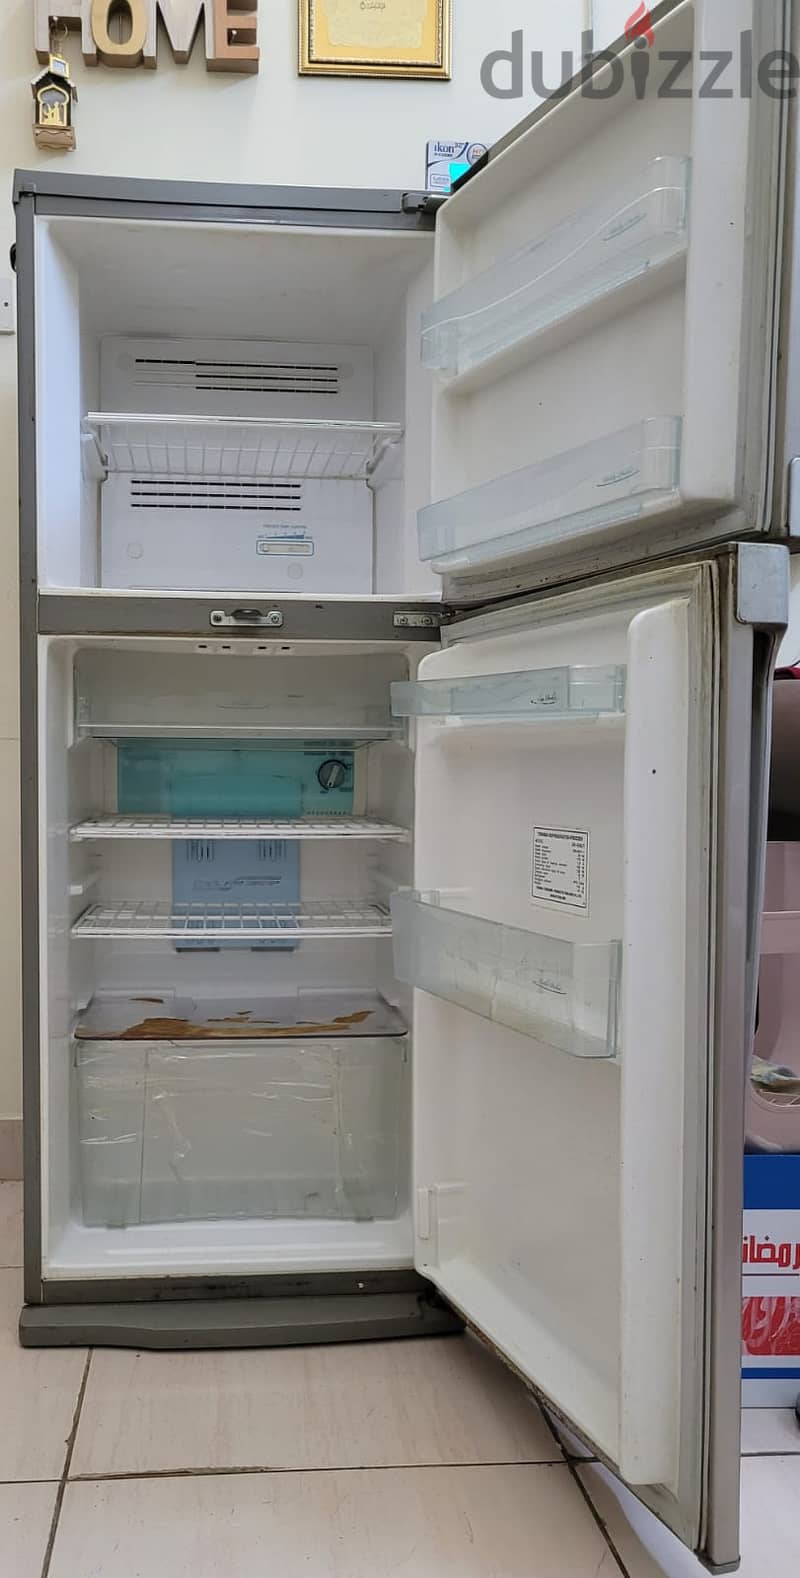 Toshiba GR-R28UT Refrigerator:Affordable and GREAT CONDITION 2